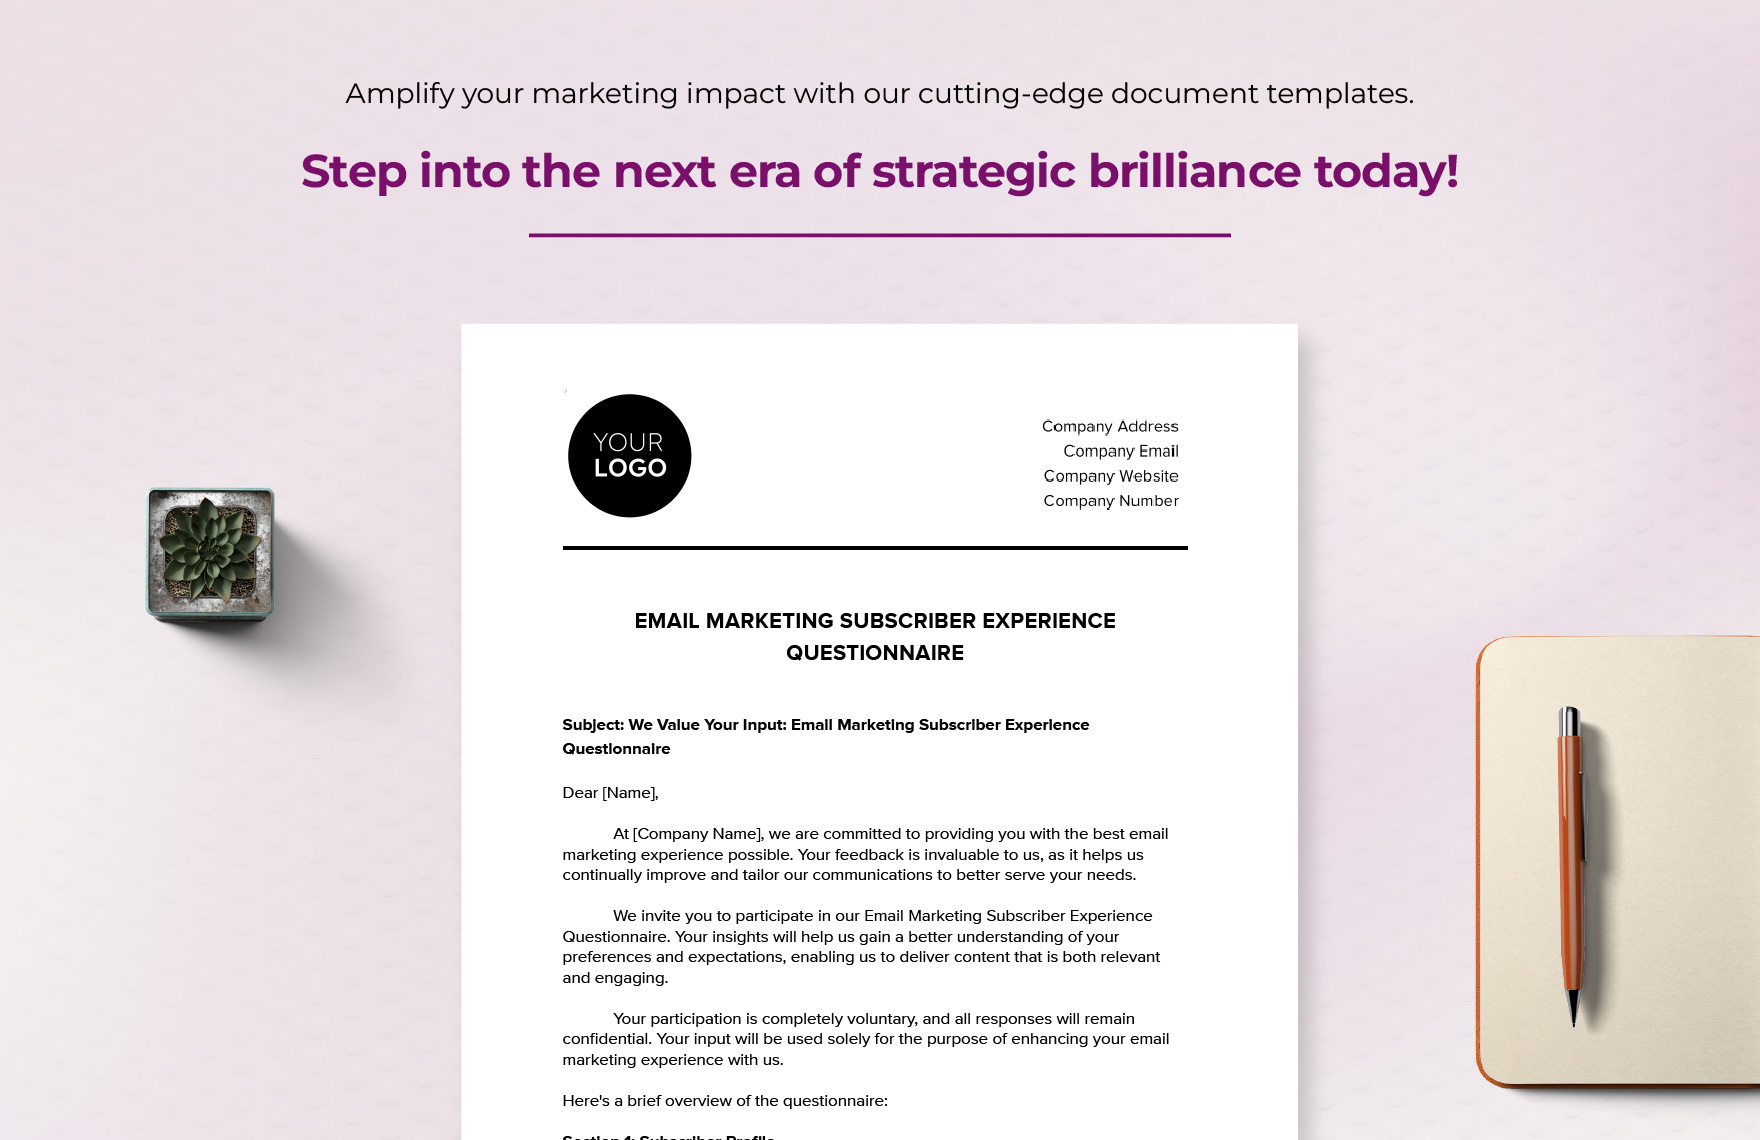 Email Marketing Subscriber Experience Questionnaire Template